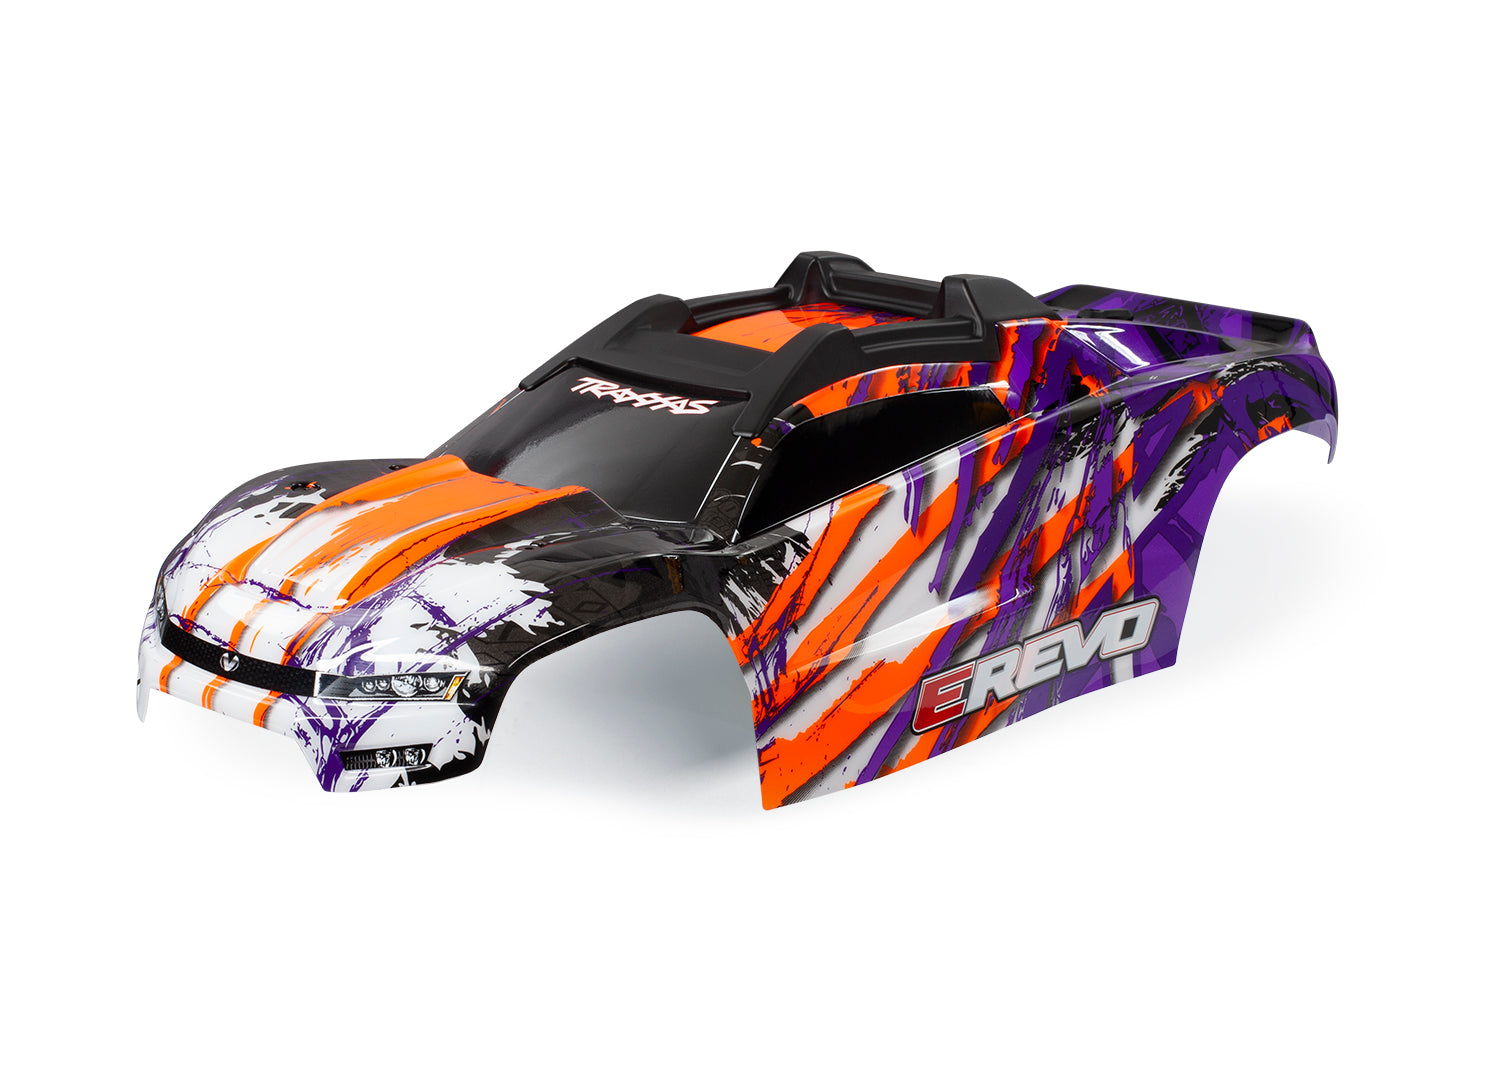 TRAXXAS 8611T Body, E-Revo, purple (painted, decals applied) (assembled with front & rear body mounts and rear body support for clipless mounting)